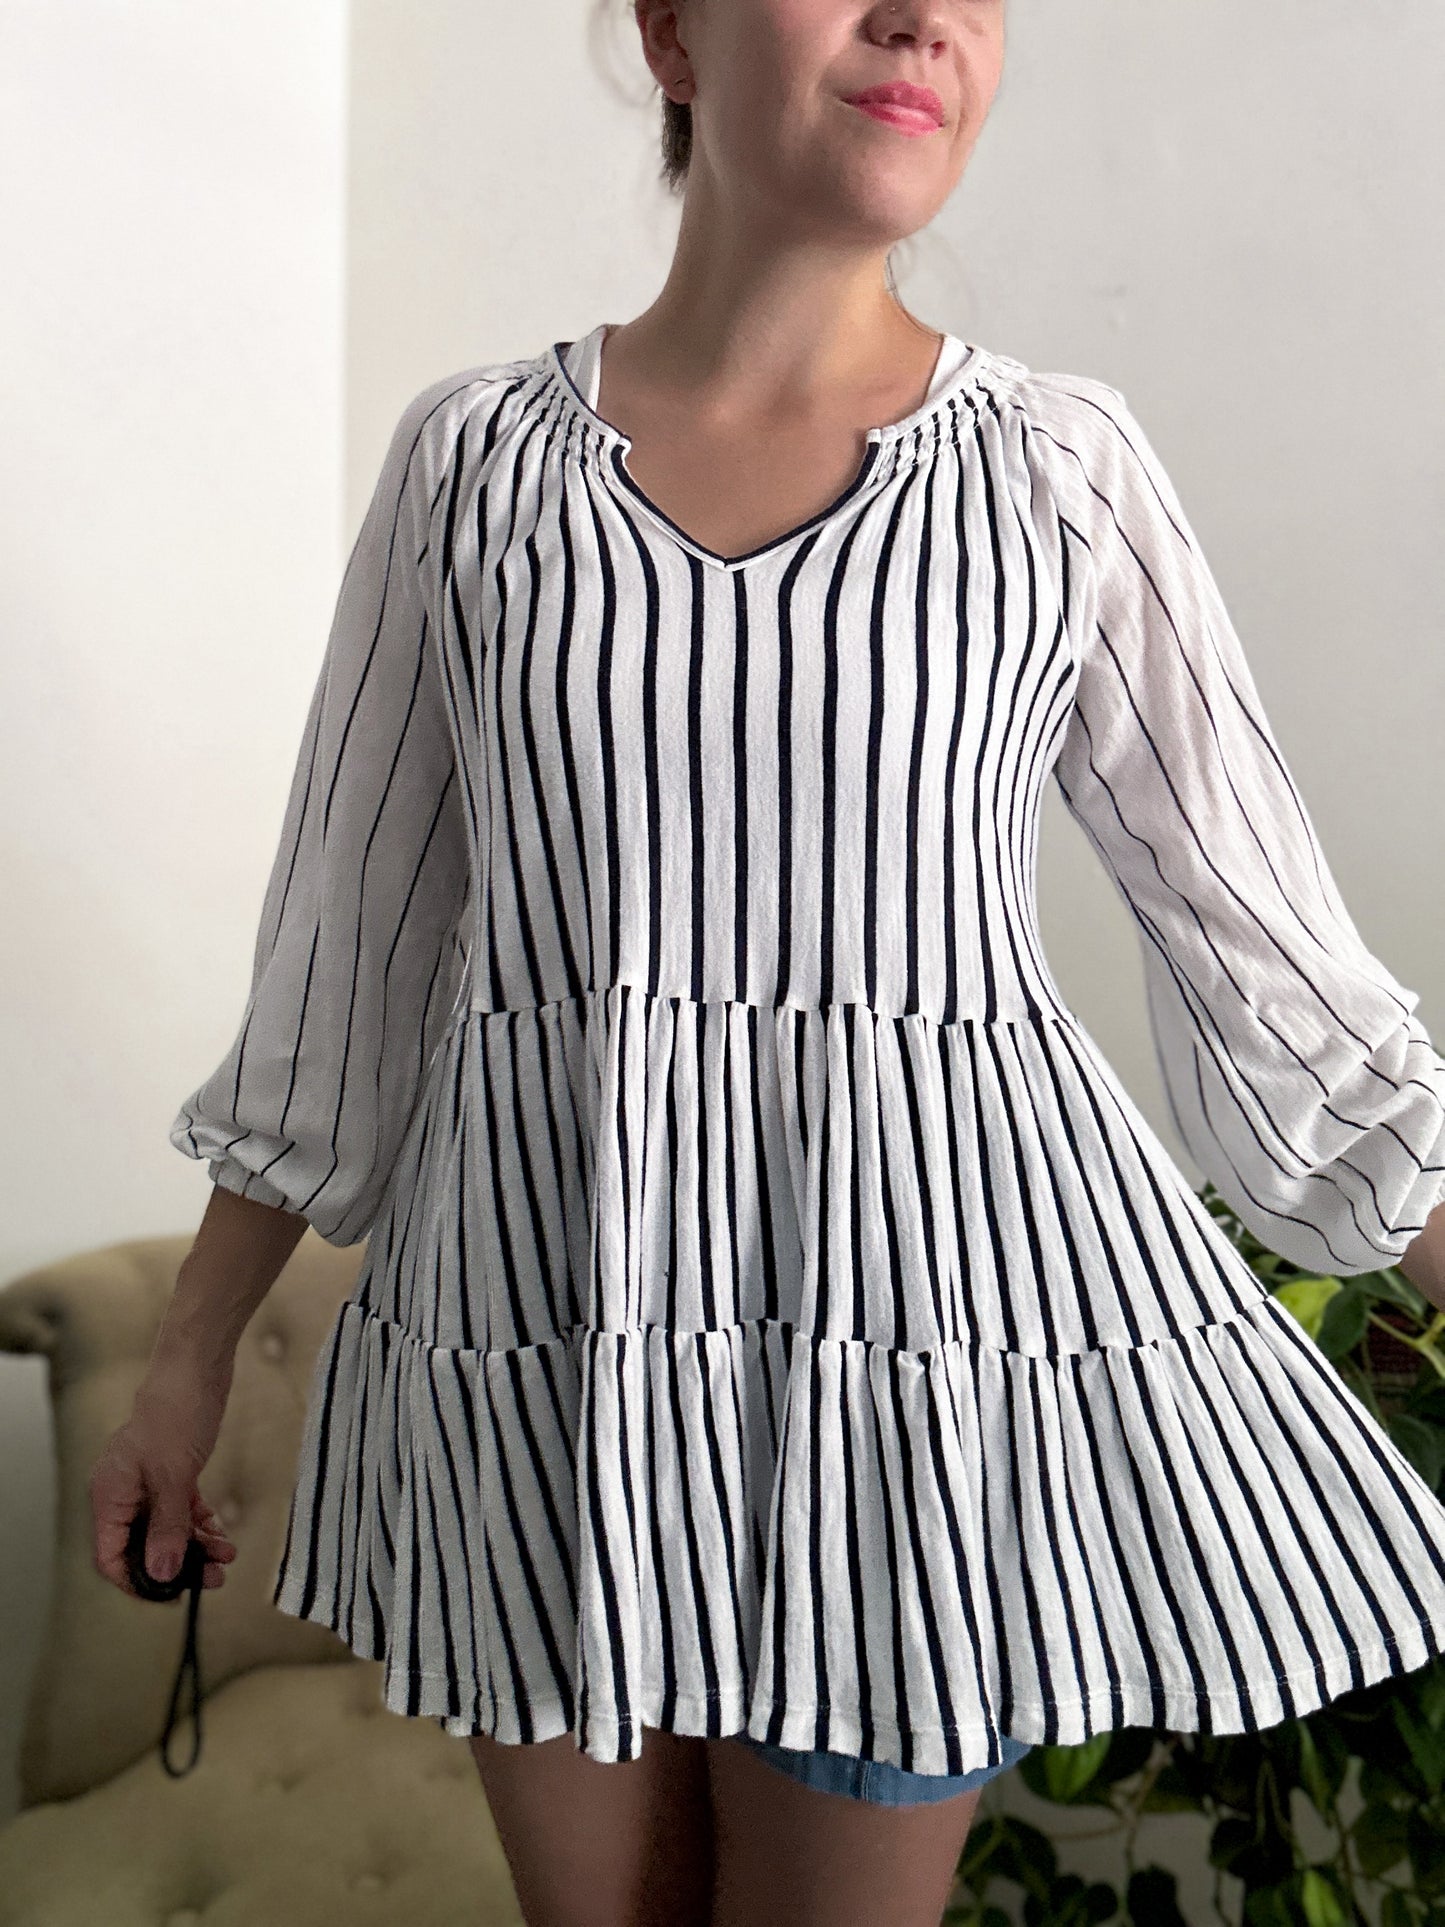 Anthropologie Striped Tiered Swingy Top (fits S)